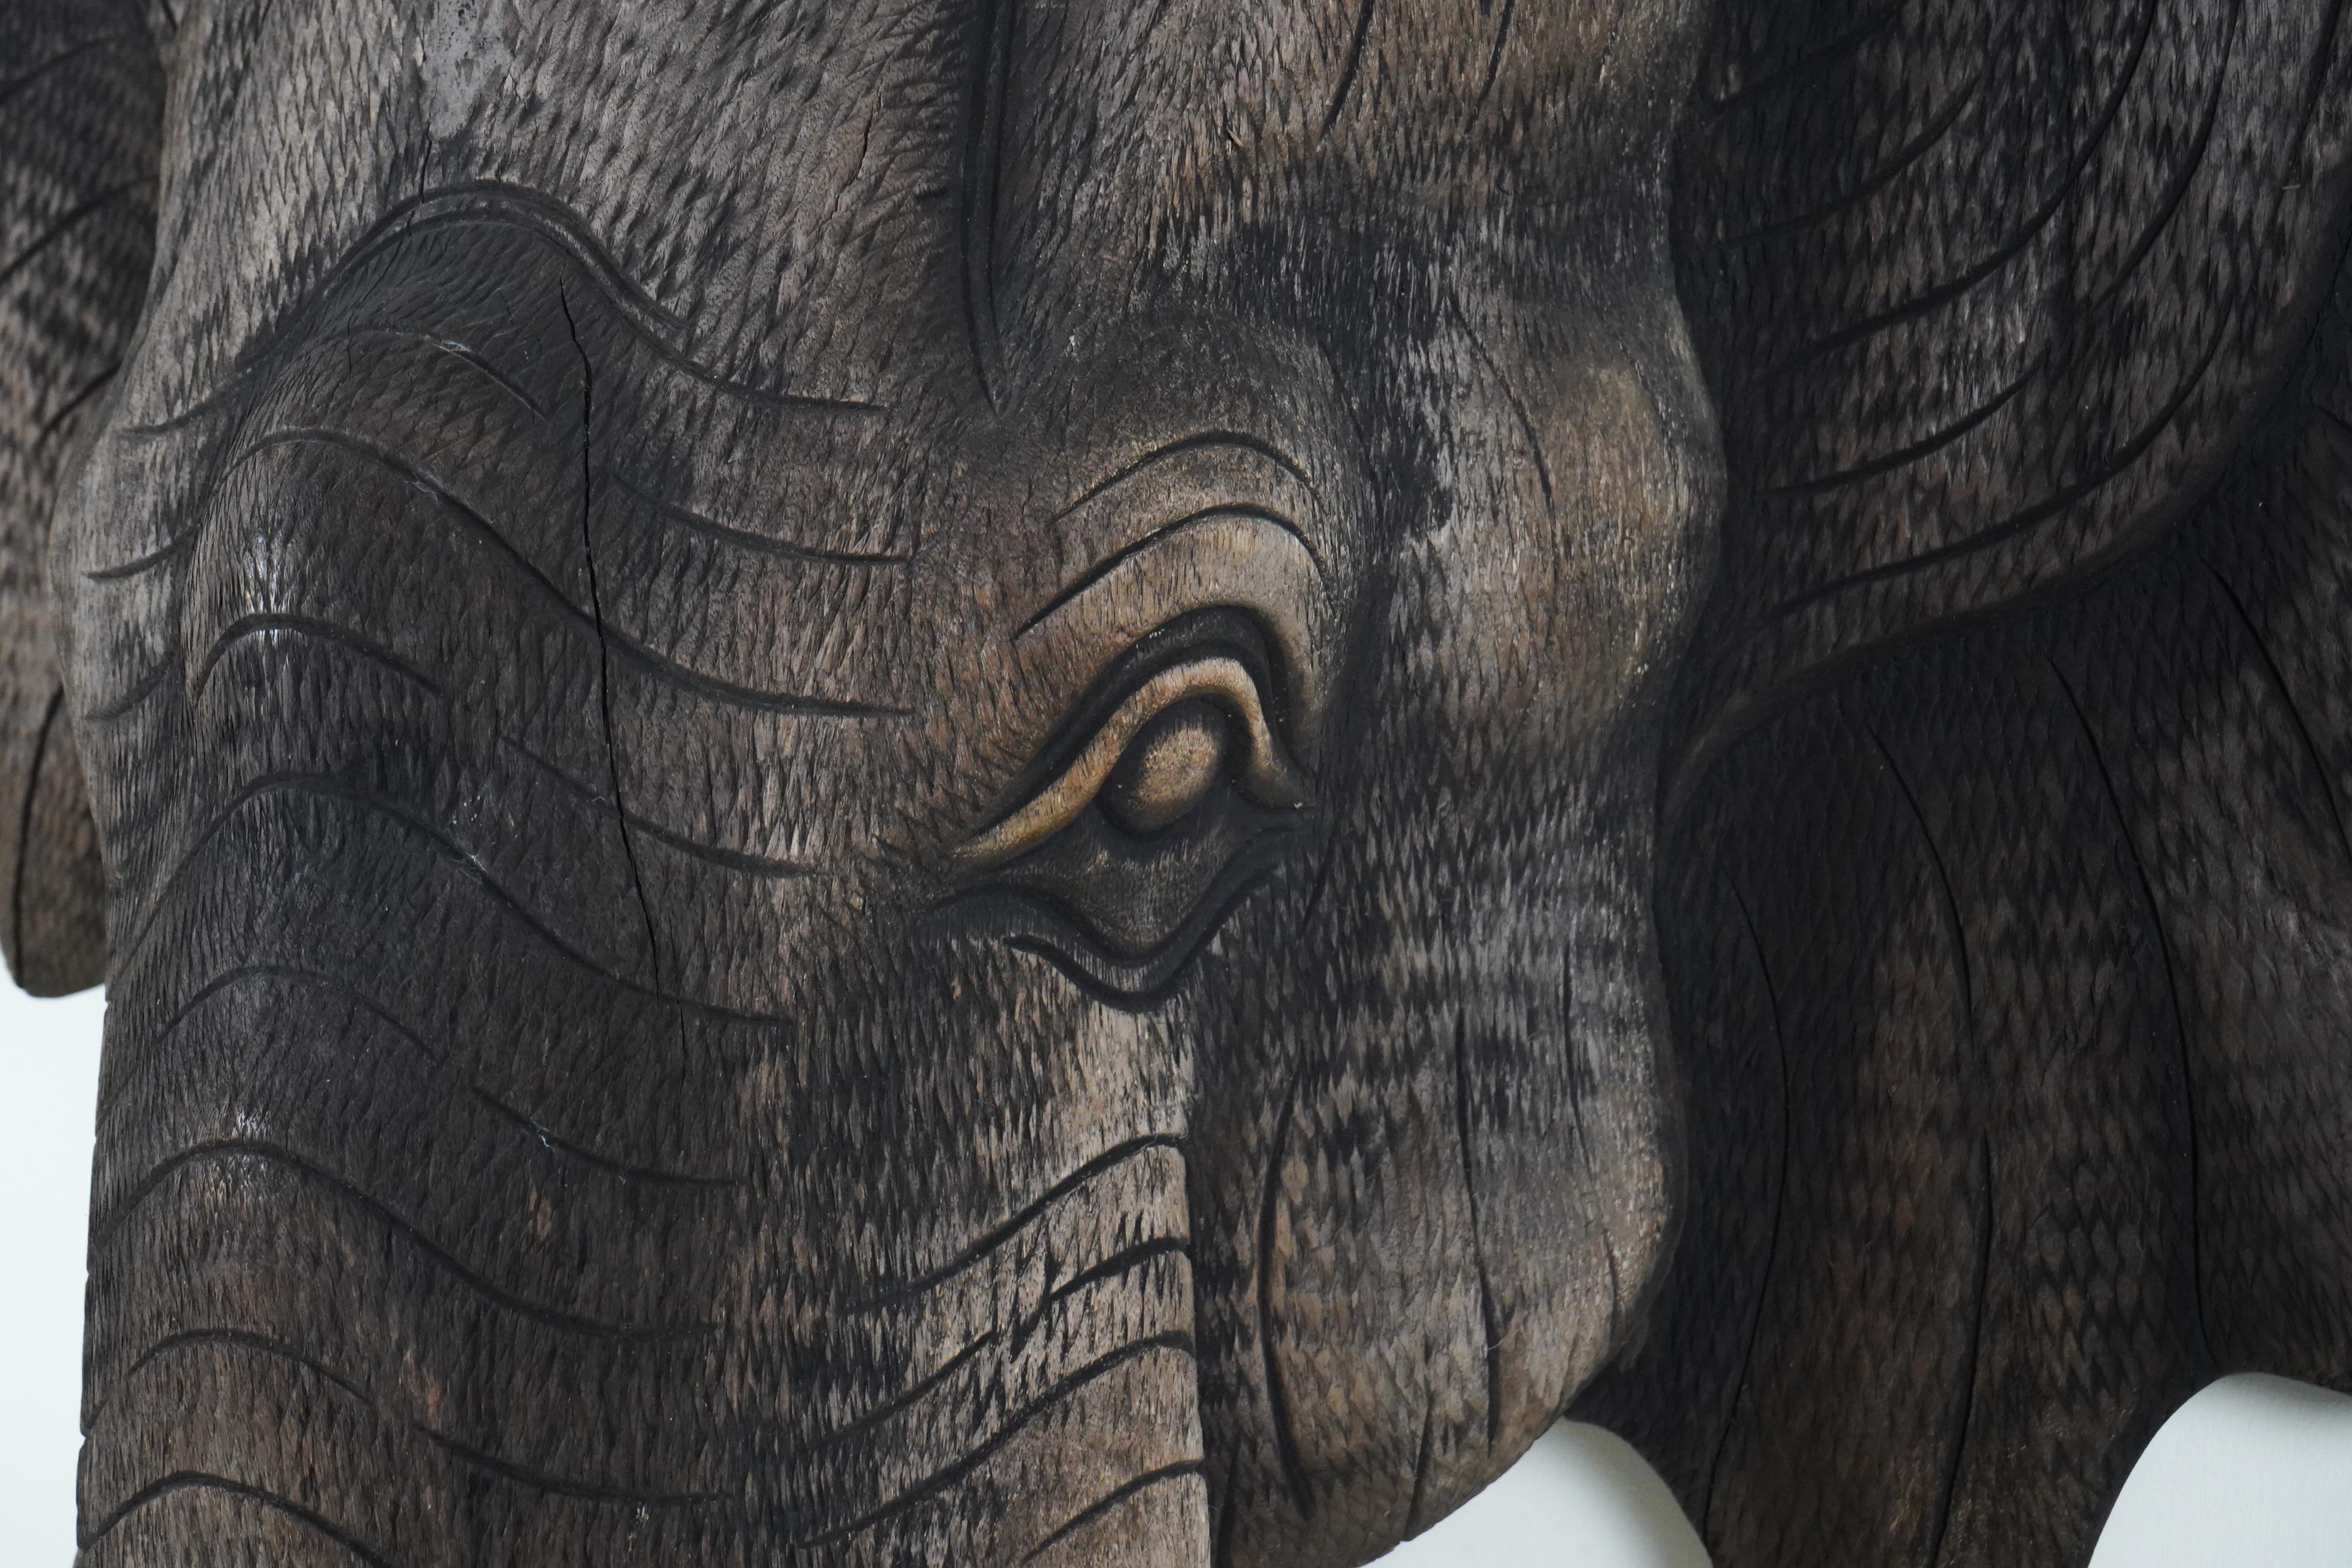 Thailand was blessed with abundant supplies of Teak and other fine hardwoods, which are essential to fine woodcarving. Today some of the best woodcarving in the world is produced in Thailand, primarily in and around Chiang Mai. This elephant was